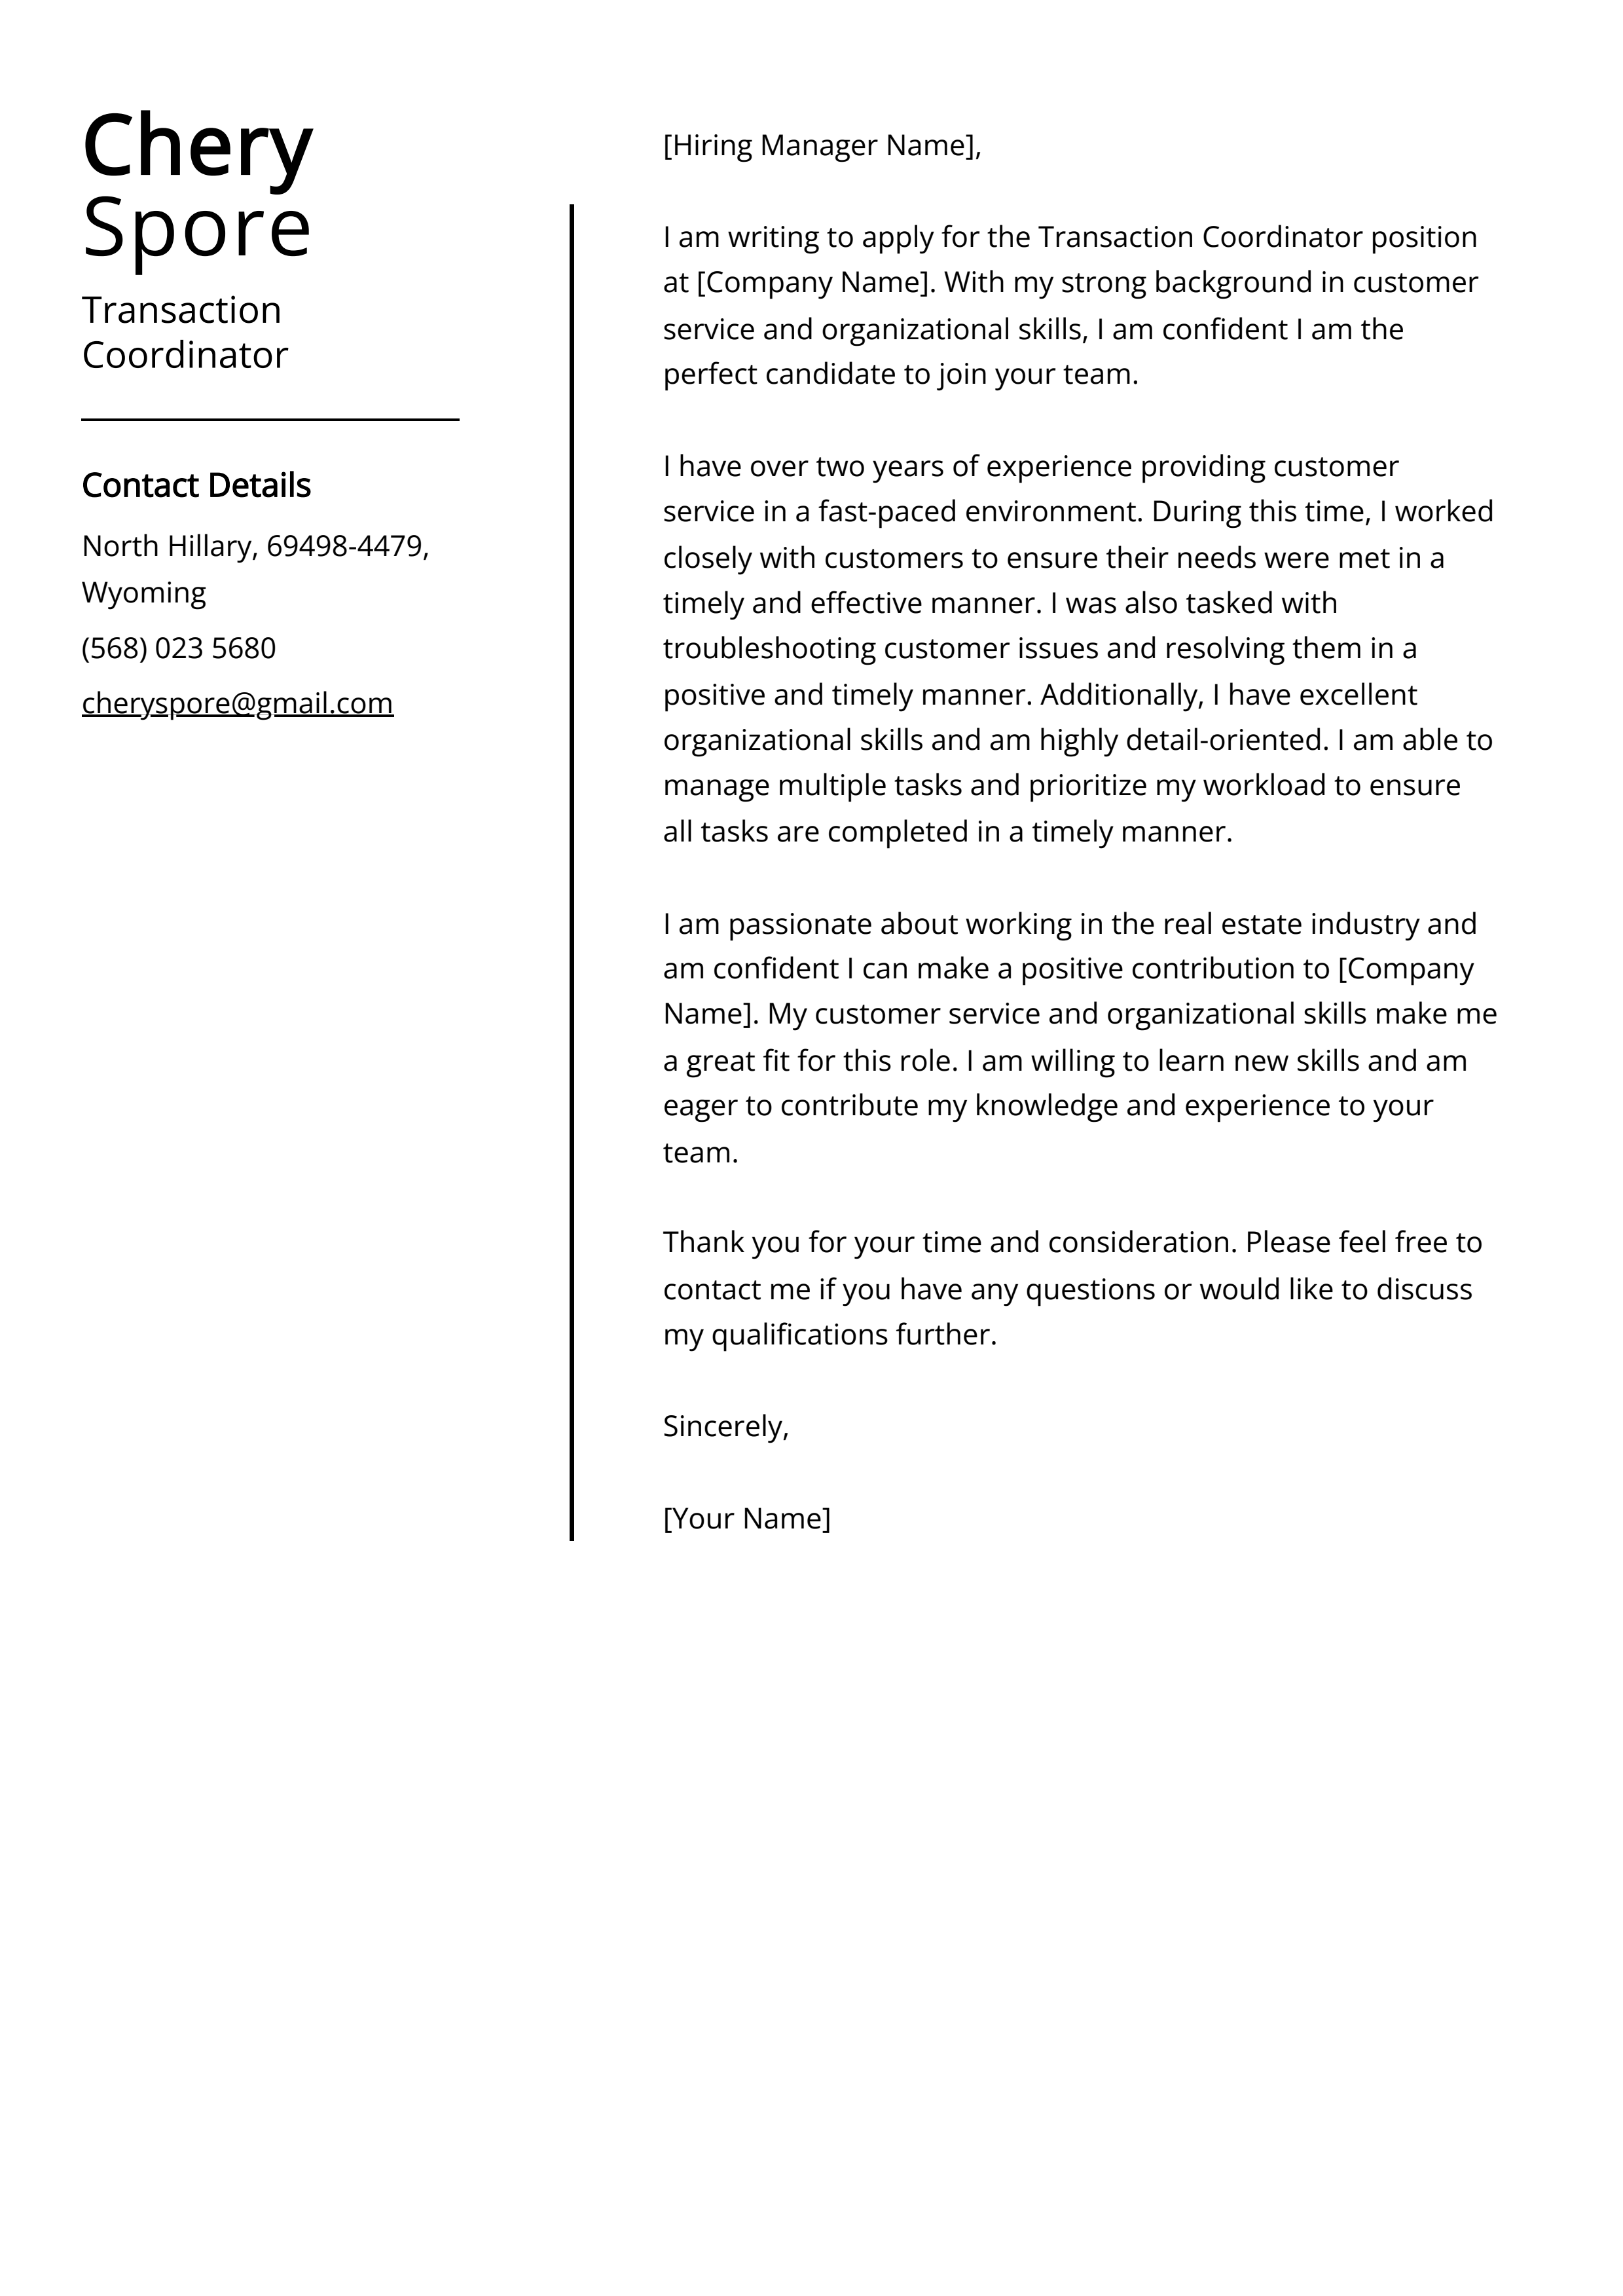 Transaction Coordinator Cover Letter Example